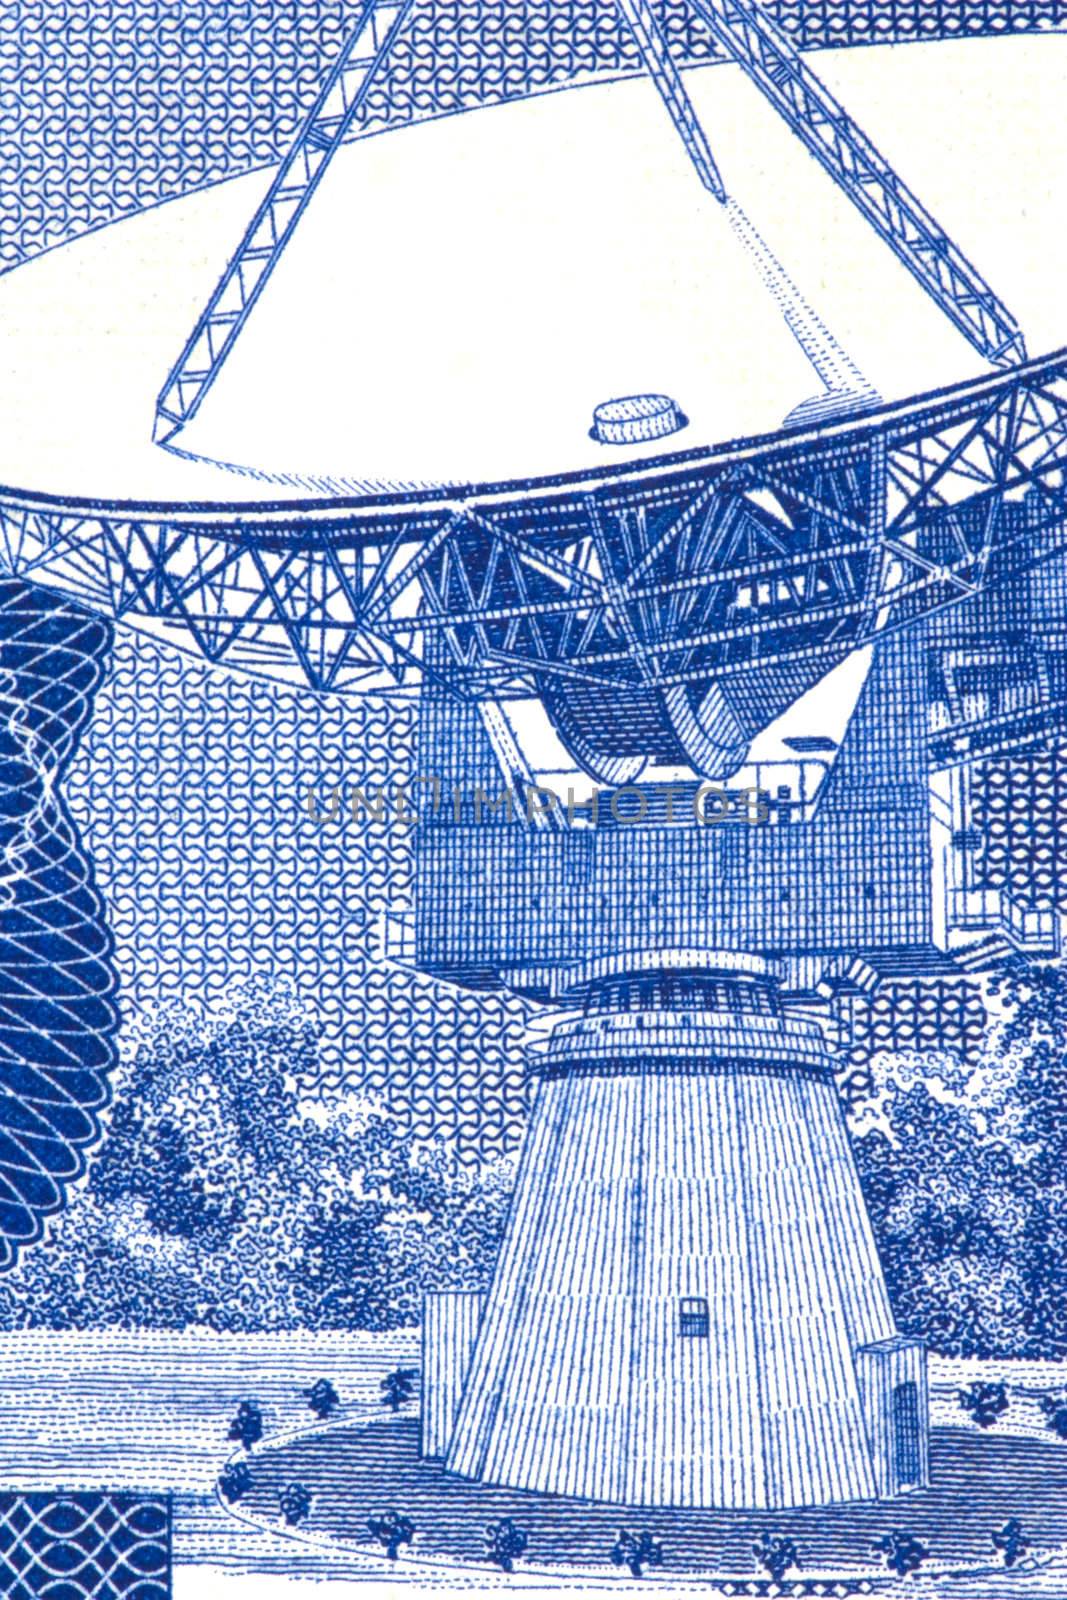 Macro image of a satellite dish on a currency note.